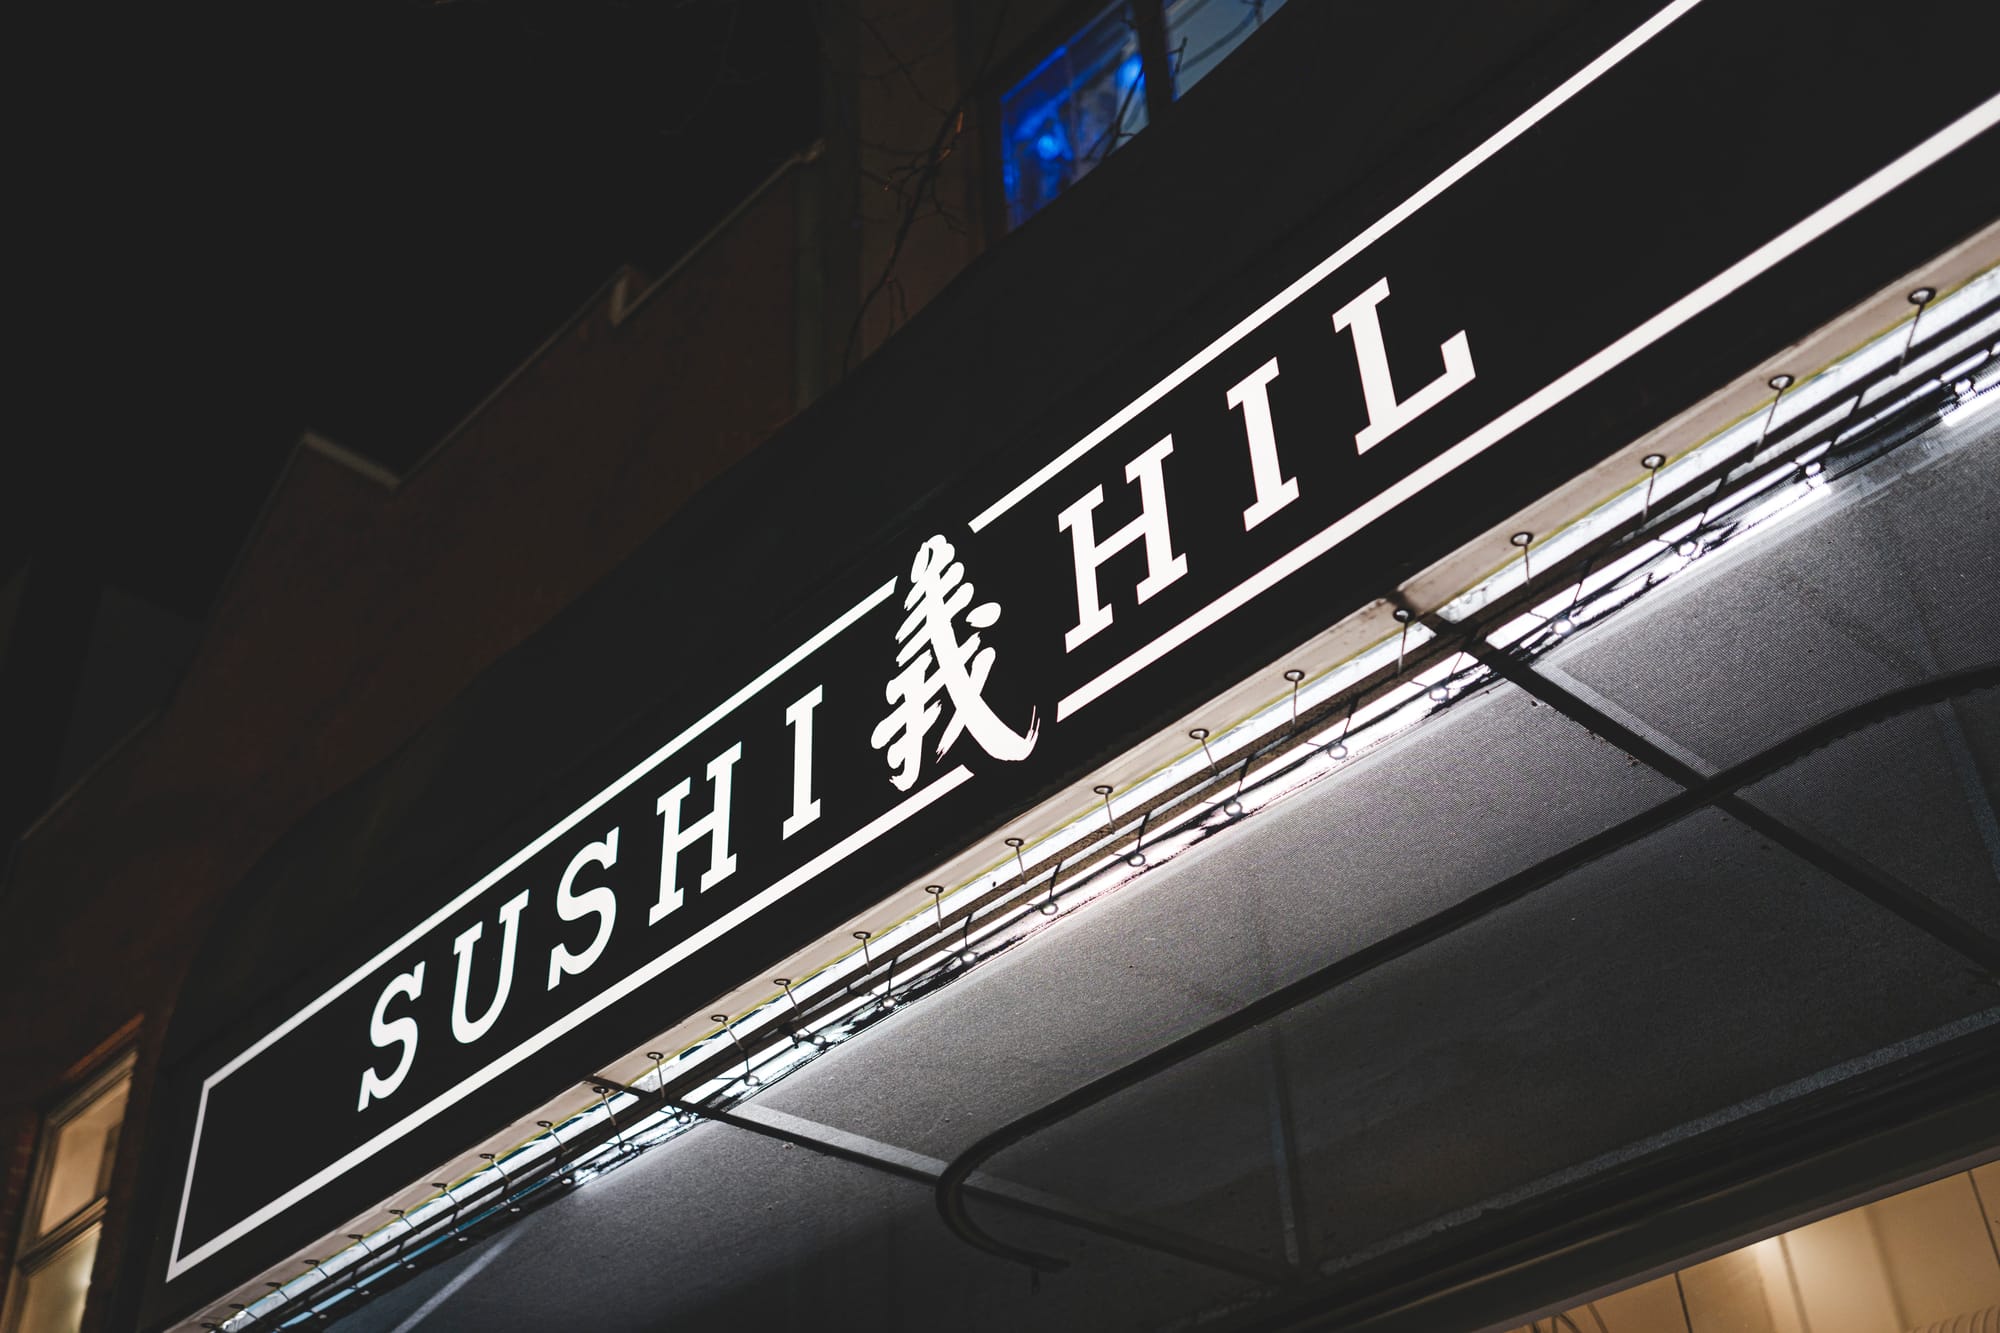 Outside Sushi Hil in Vancouver